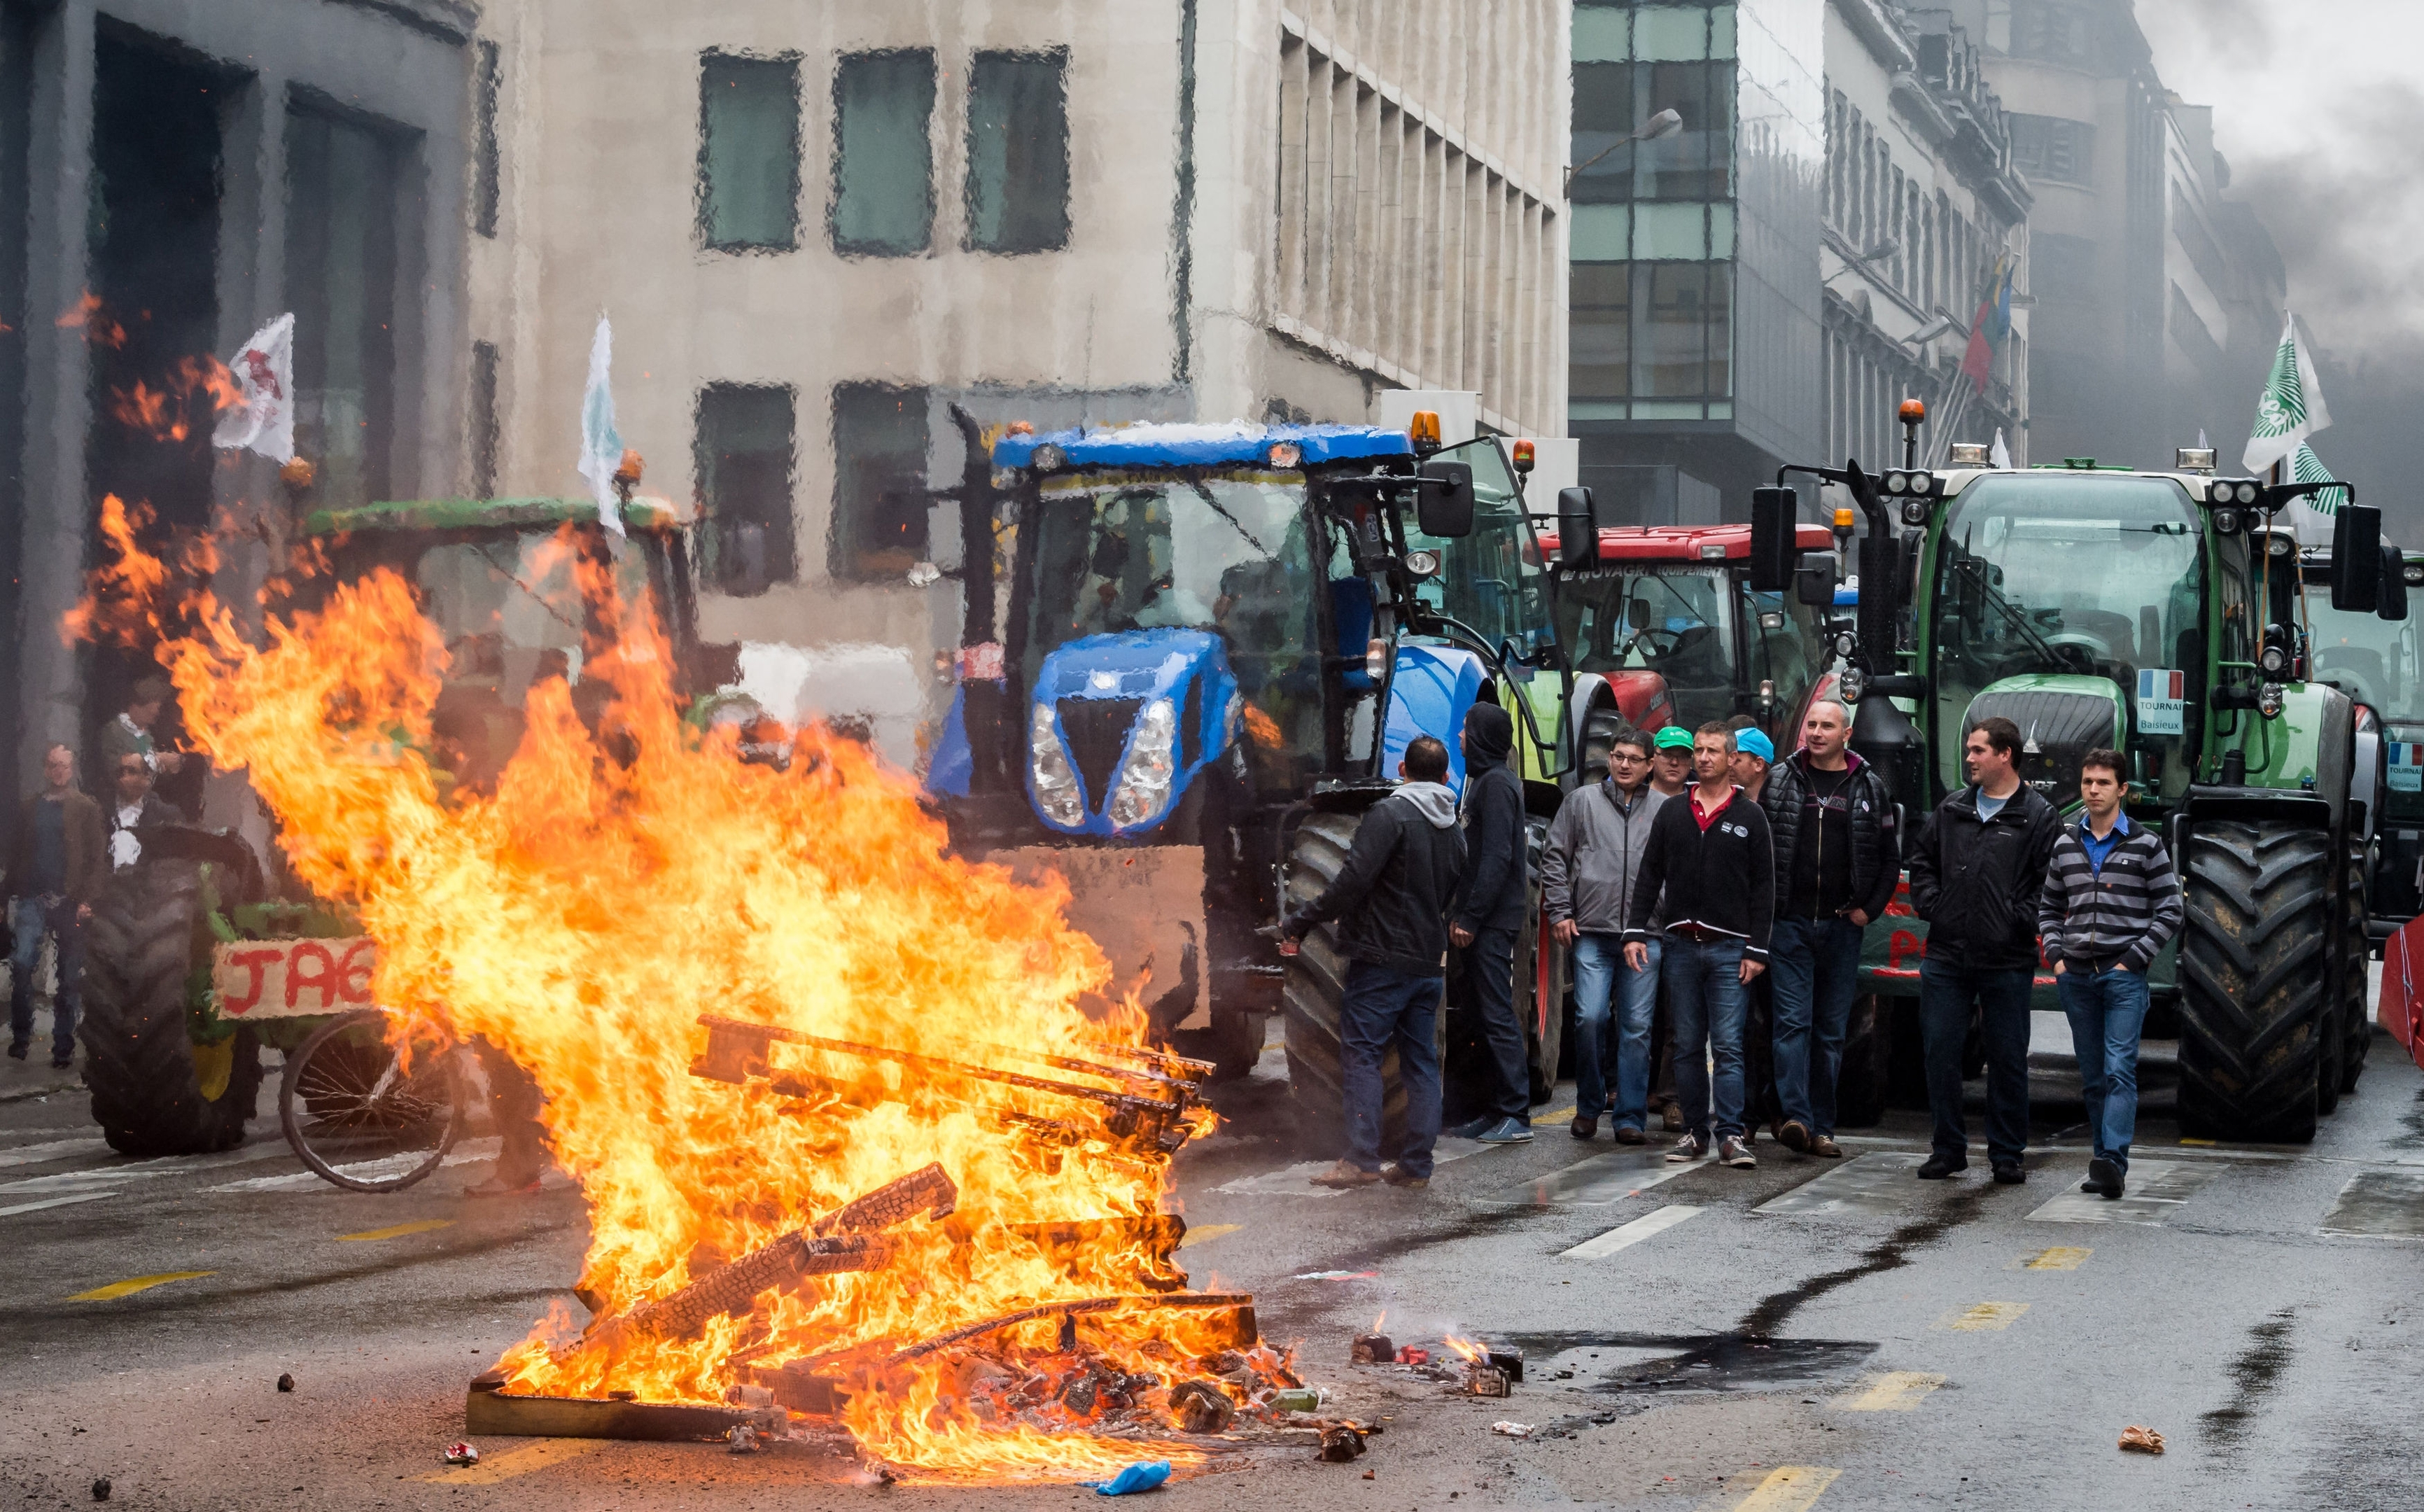 Farmers protesting in Brussels